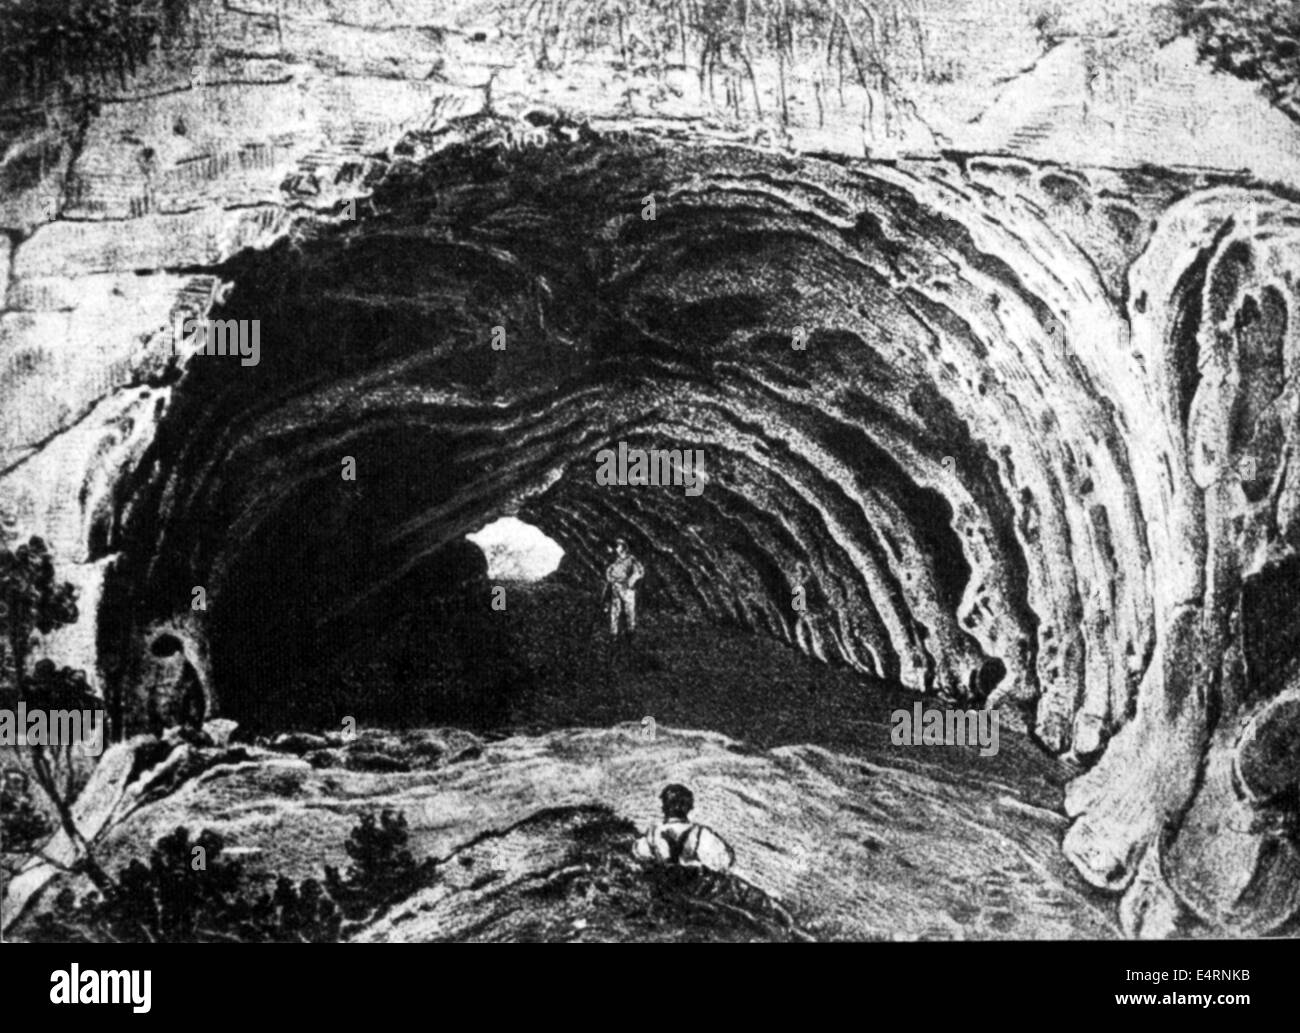 prehistory, cave, entrance of the Little Feldhof Grotto, Neandertal, Germany, wood engraving after drawing, 2nd half 19th century, Neanderthal, Neanderthal man, Stone Age, Neandertal, valley, North Rhine-Westphalia, North-Rhine, Rhine, Westphalia, Nordrhein-Westfalen, Nordrhein-Westphalen, Bergisches Land, Niederbergisches Land, Kingdom of Prussia, Rhine Province, people, prehistory, prehistoric times, cave, caves, entrance, entranceway, grotto, grot, grottoes, grottos, grots, historic, historical, Additional-Rights-Clearences-Not Available Stock Photo